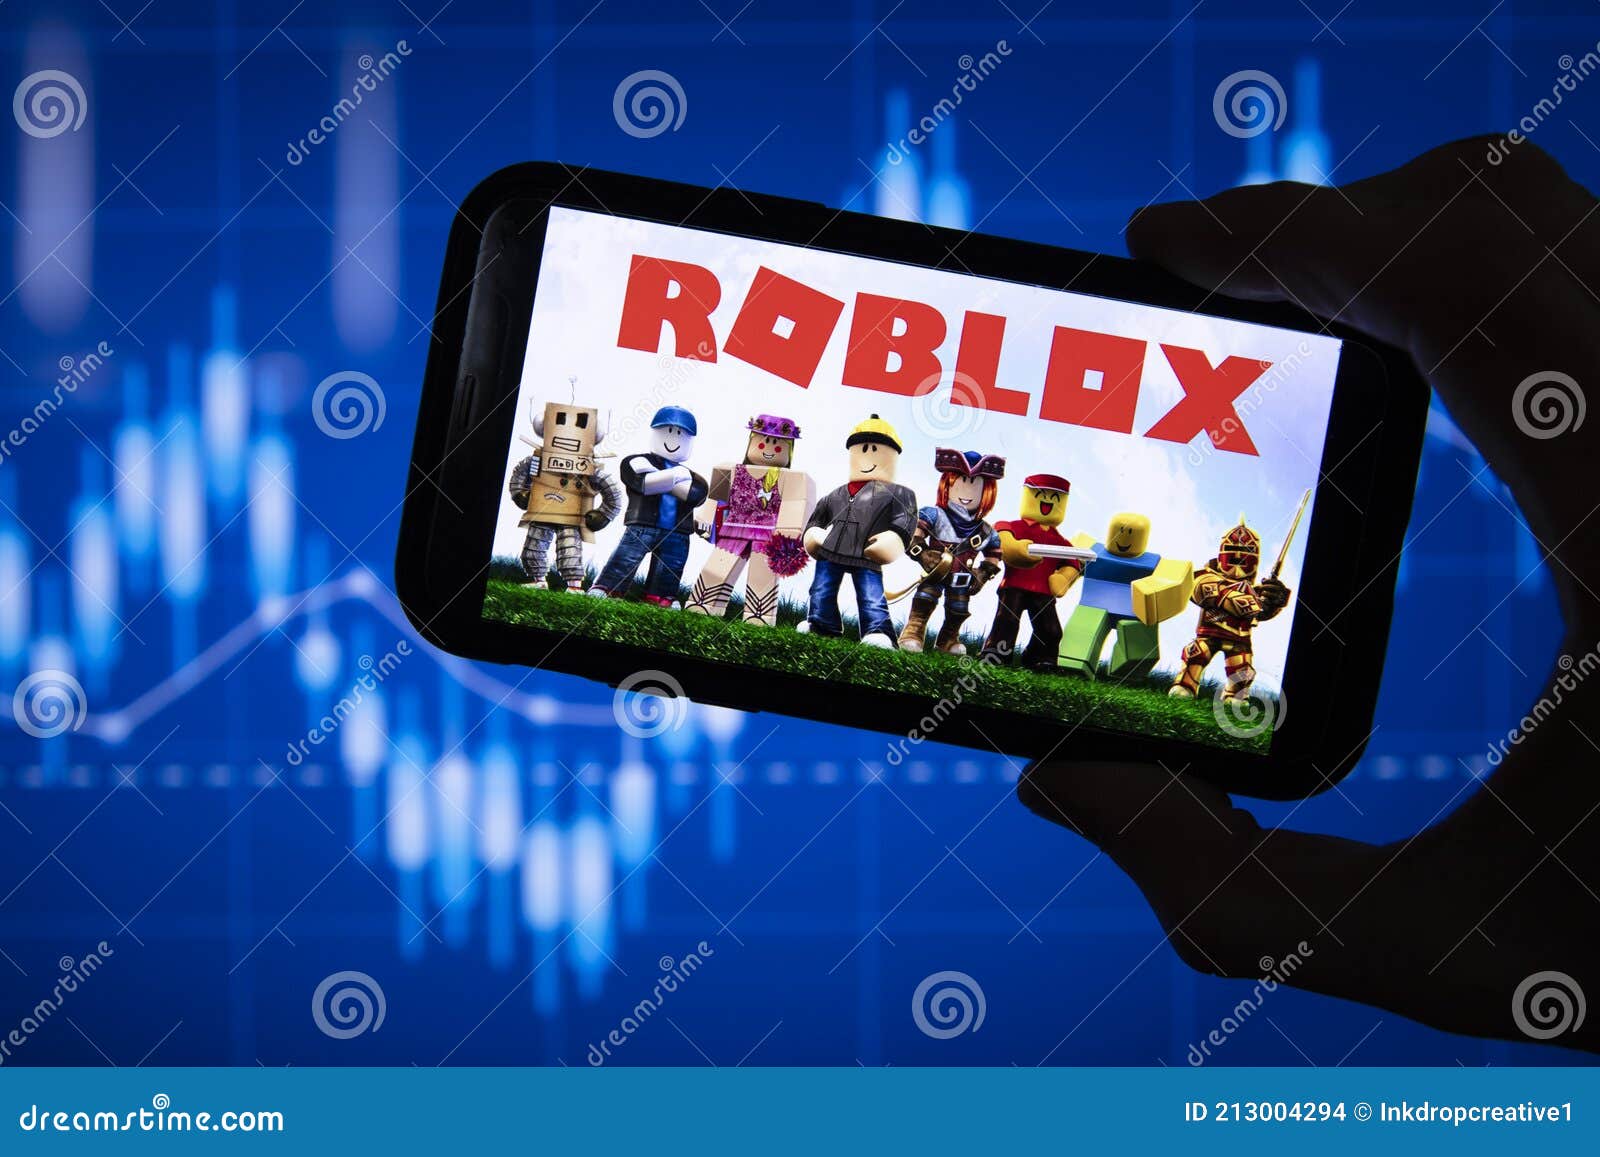 Roblox Photos Free Royalty Free Stock Photos From Dreamstime - ice cream shop roblox id